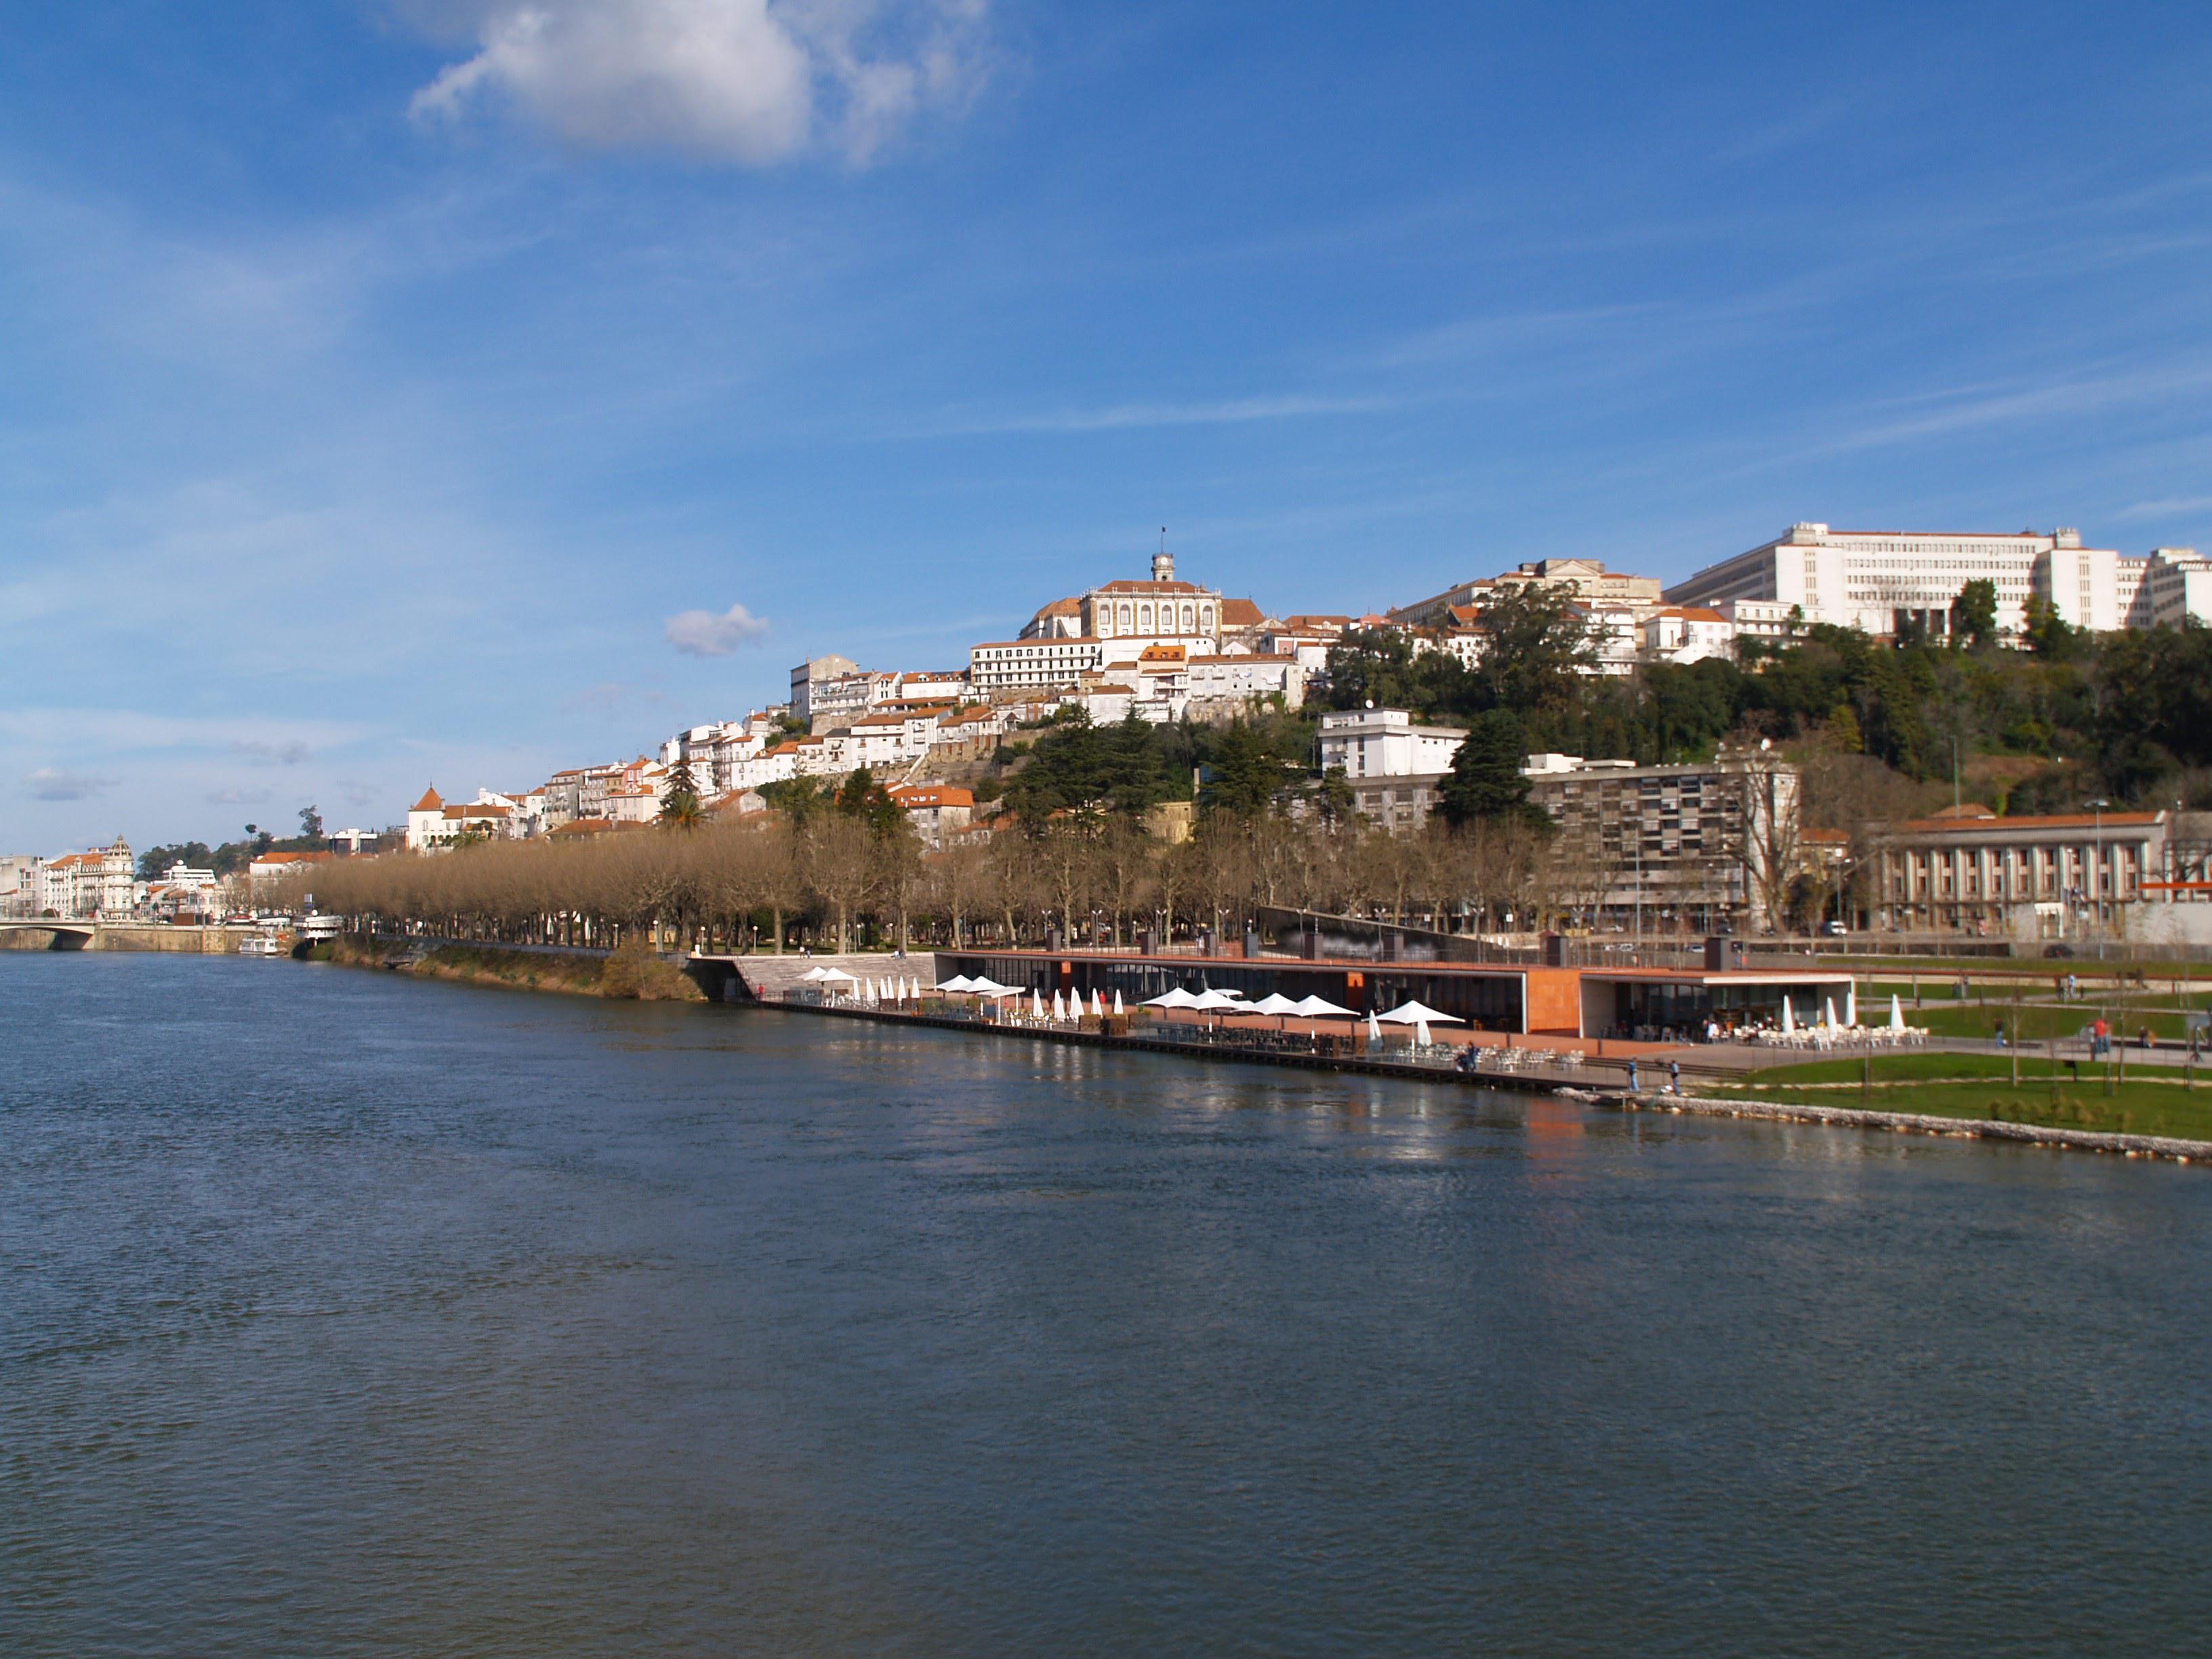 Coimbra, also called the City of students seen from the Mondego River